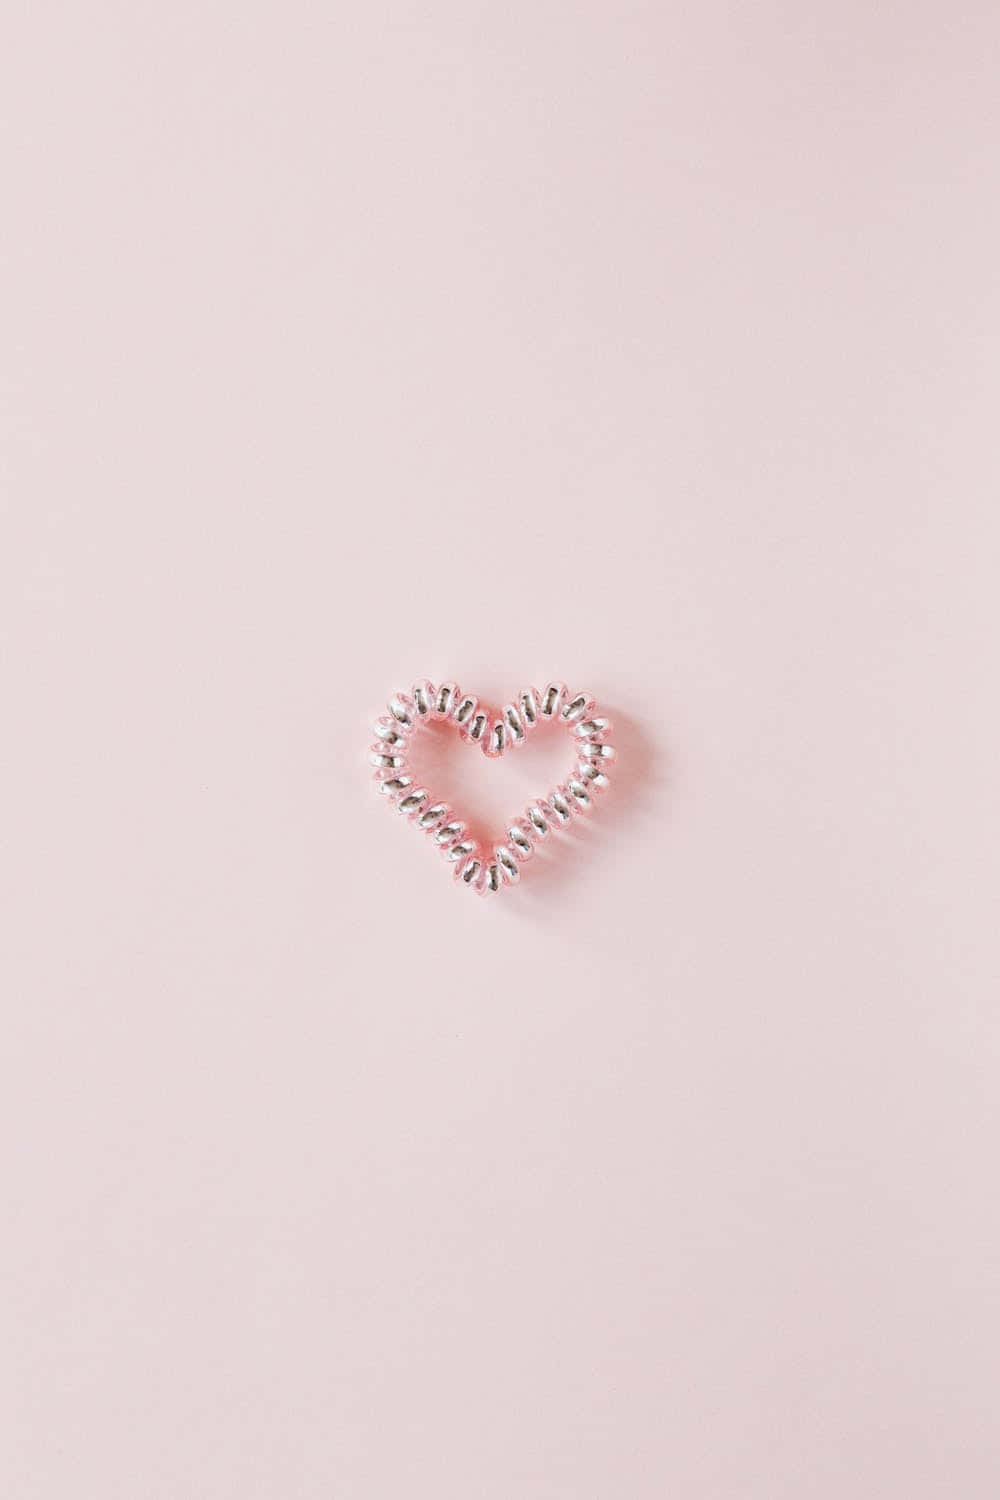 A Heart Shaped Hair Clip On A Pink Background Wallpaper